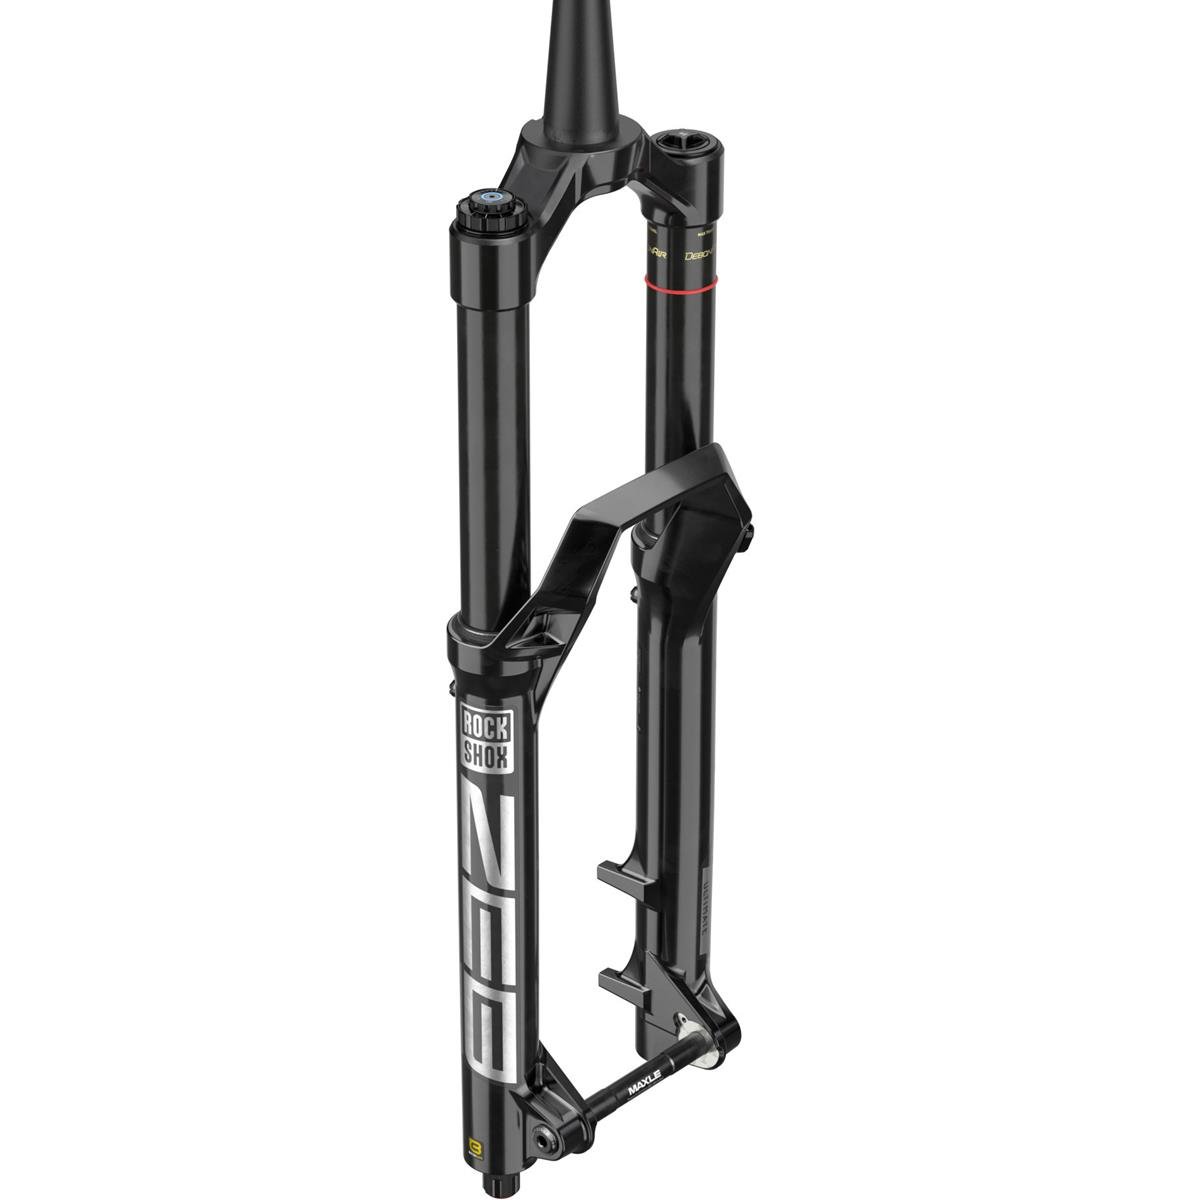 RockShox Forcella ZEB Ultimate Charger 3 RC2 29 Pollici, 15x110 mm, Nero, 44 mm Offset, 160 mm - 190 mm